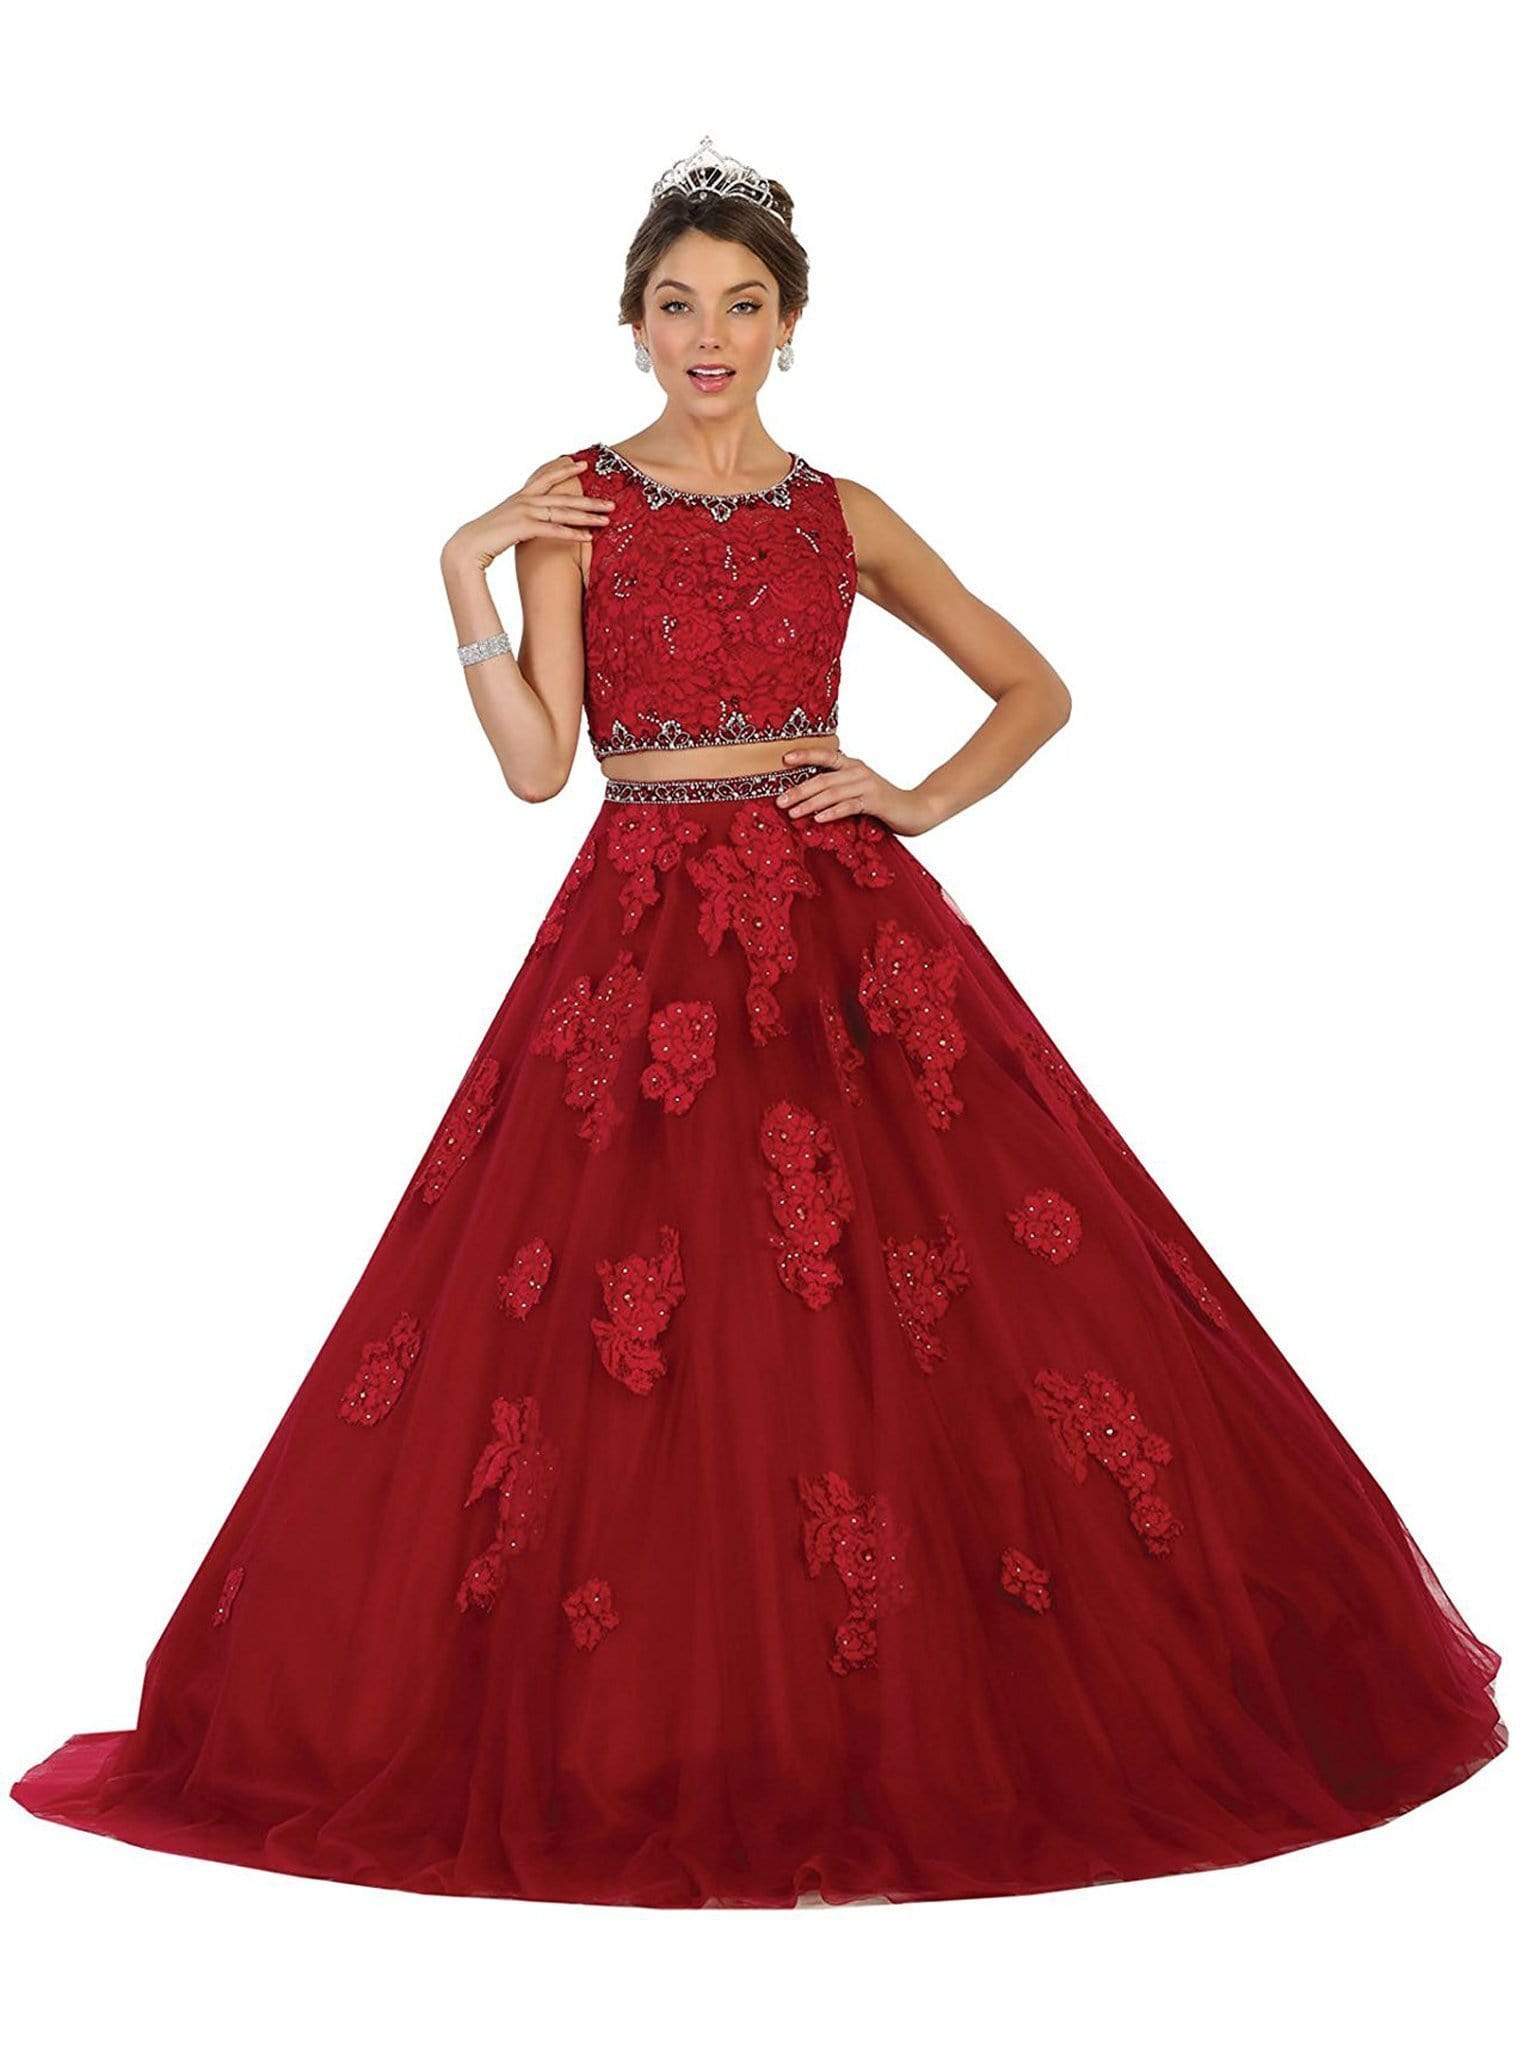 May Queen - Two Piece Embellished Evening Gown
